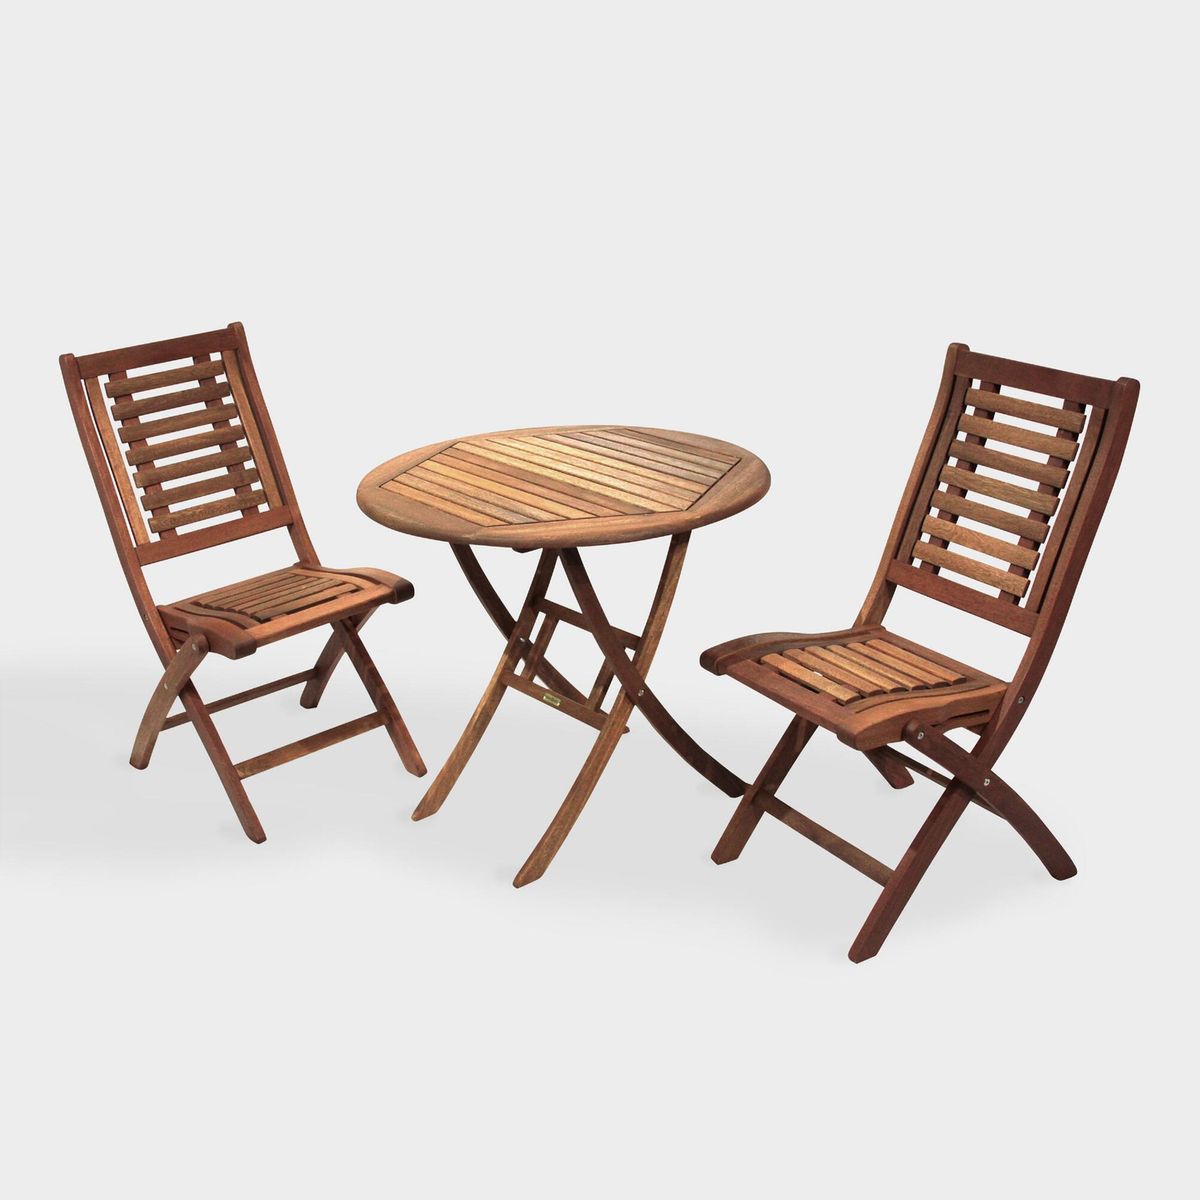 Brown PALDIN Folding Wooden Garden Furniture Dining Set 2 Seater Outdoor&Indoor Patio Coffee Rustic Square Table & Chairs set 